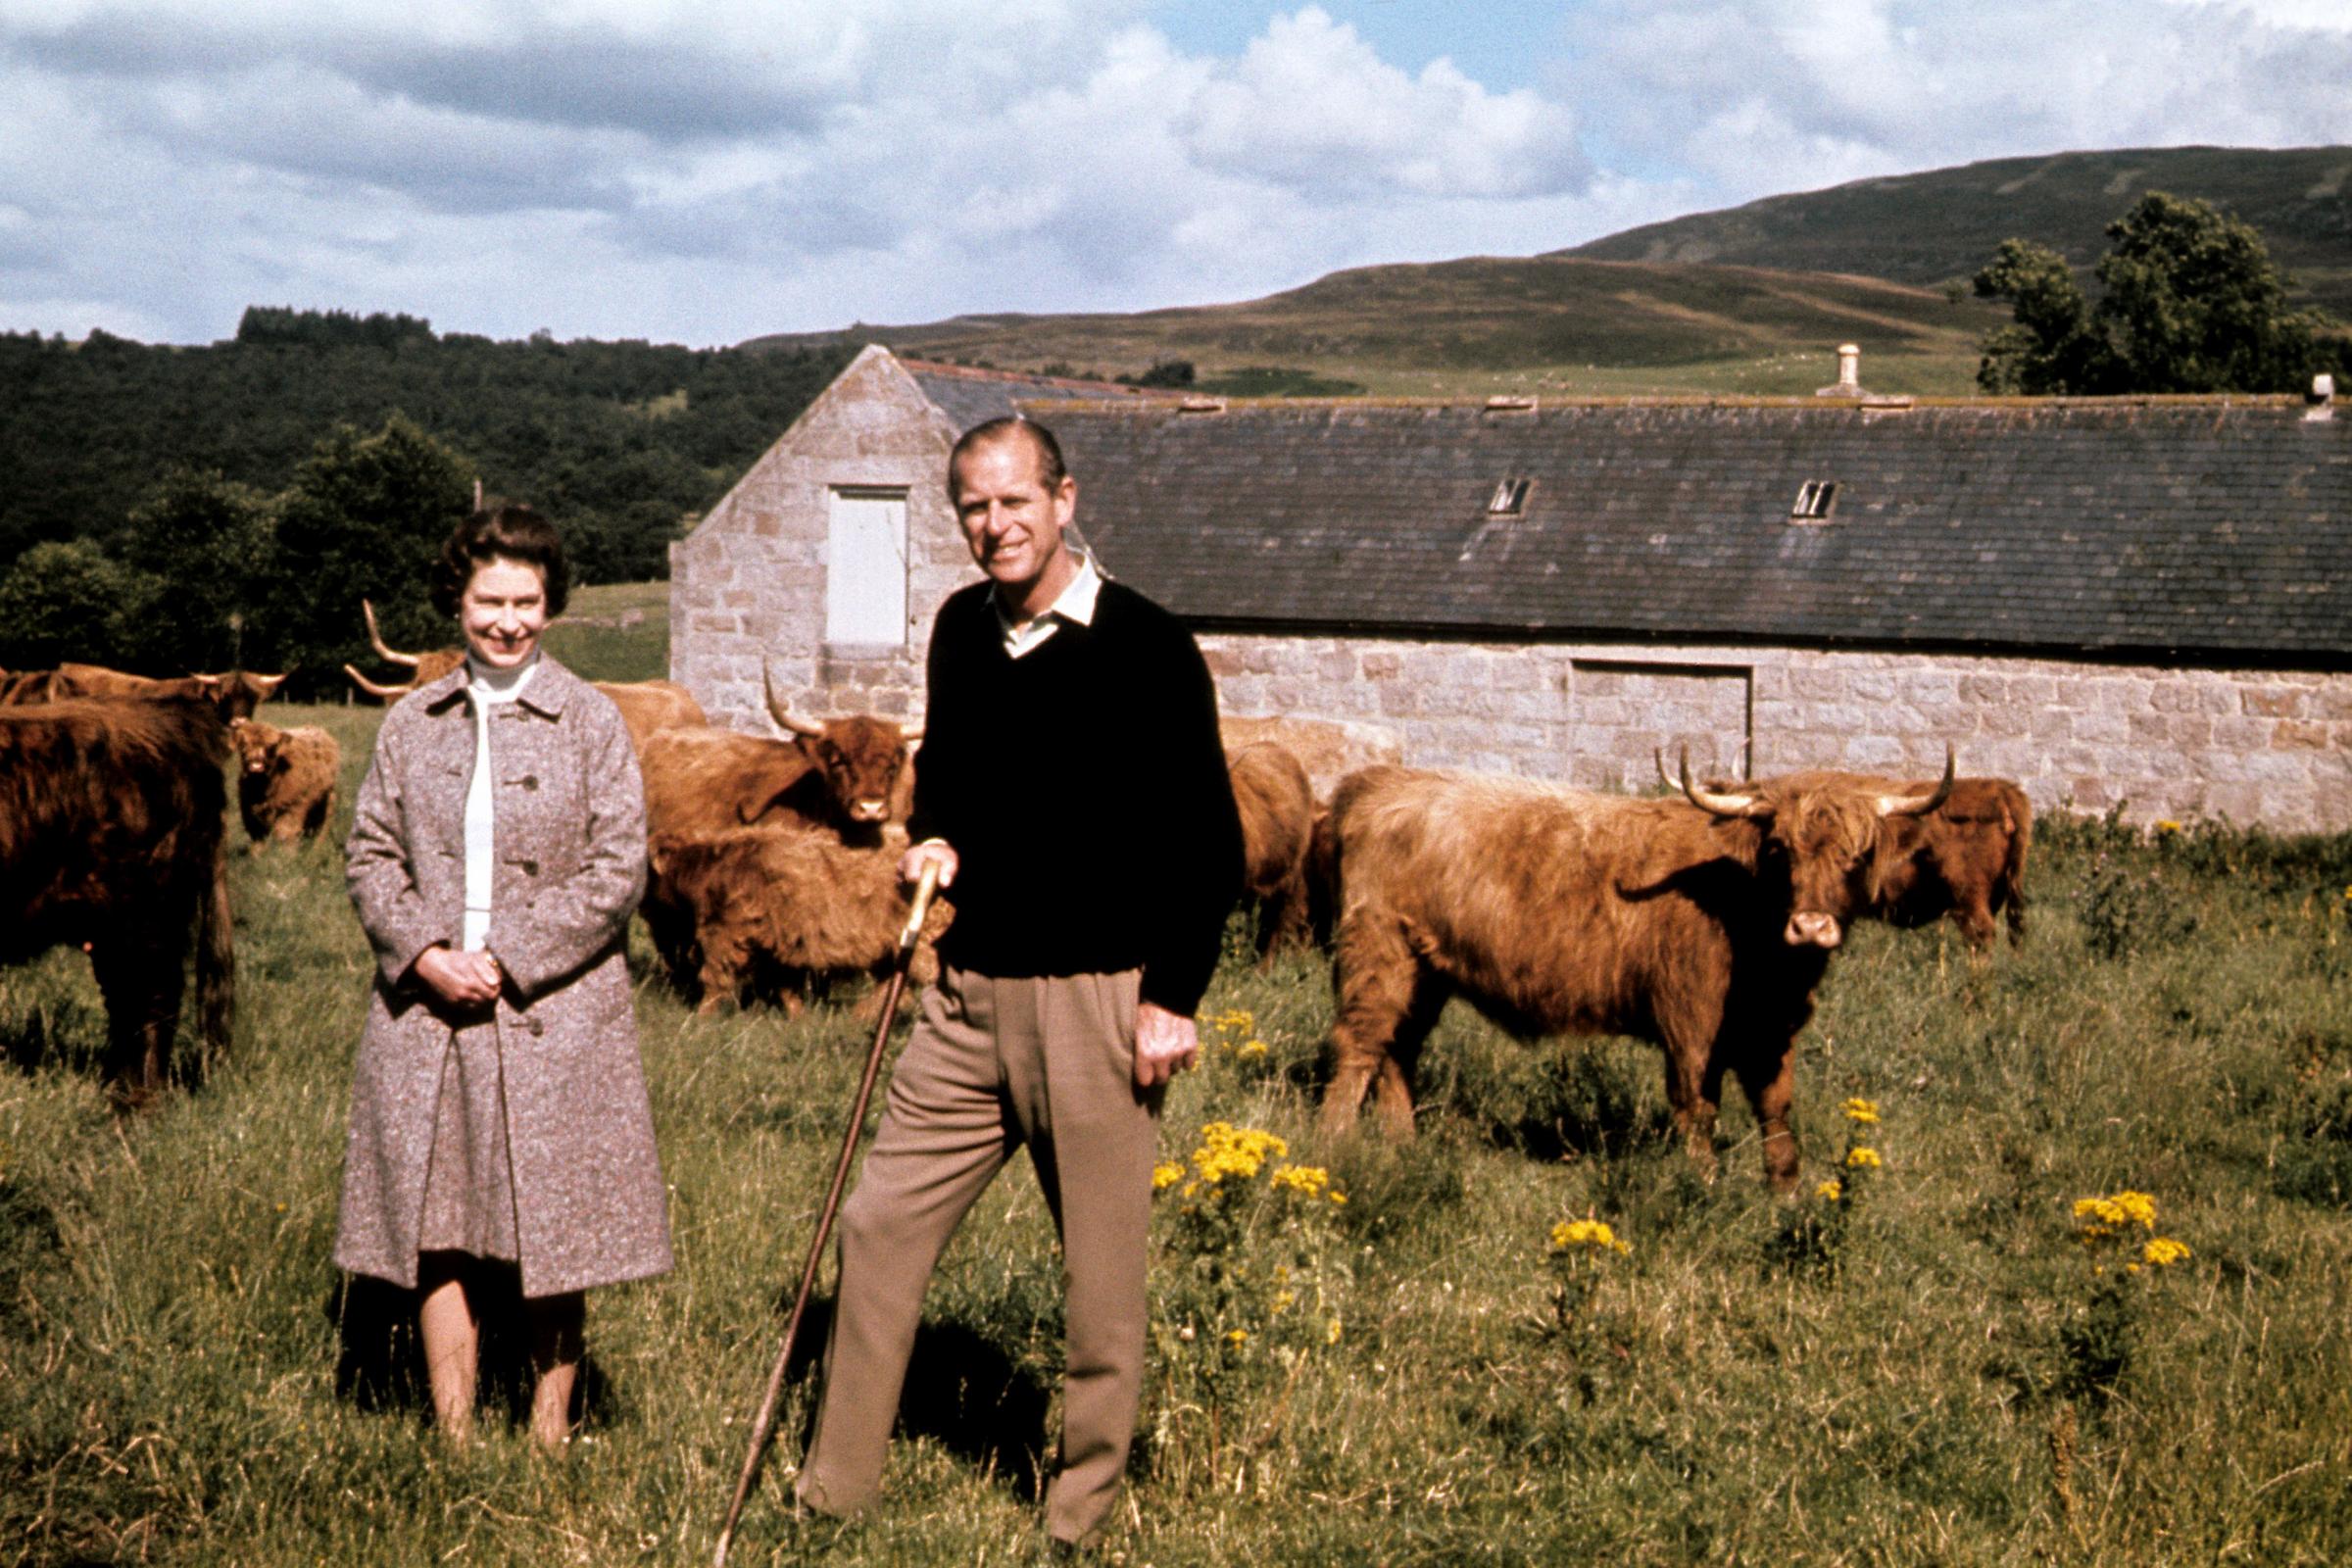 Queen Elizabeth II and the Duke of Edinburgh during a visit to a farm on their Balmoral estate, to celebrate their Silver Wedding anniversary. 